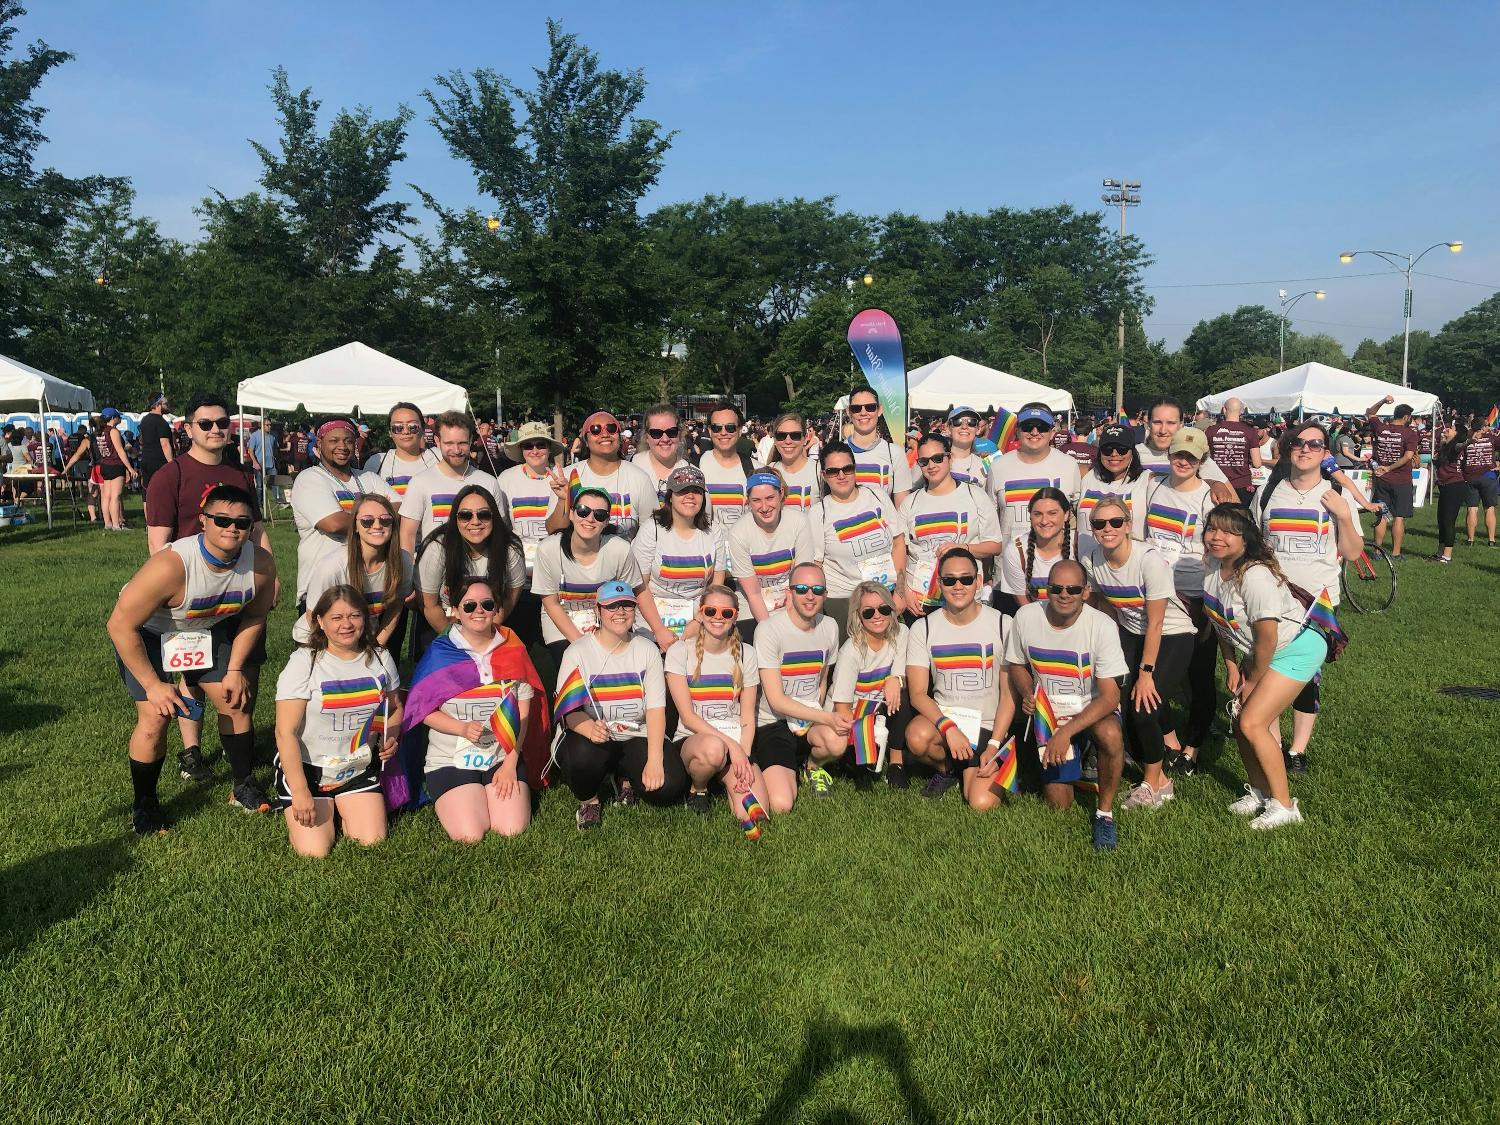 Team TBI at the Proud to Run race in 2019.